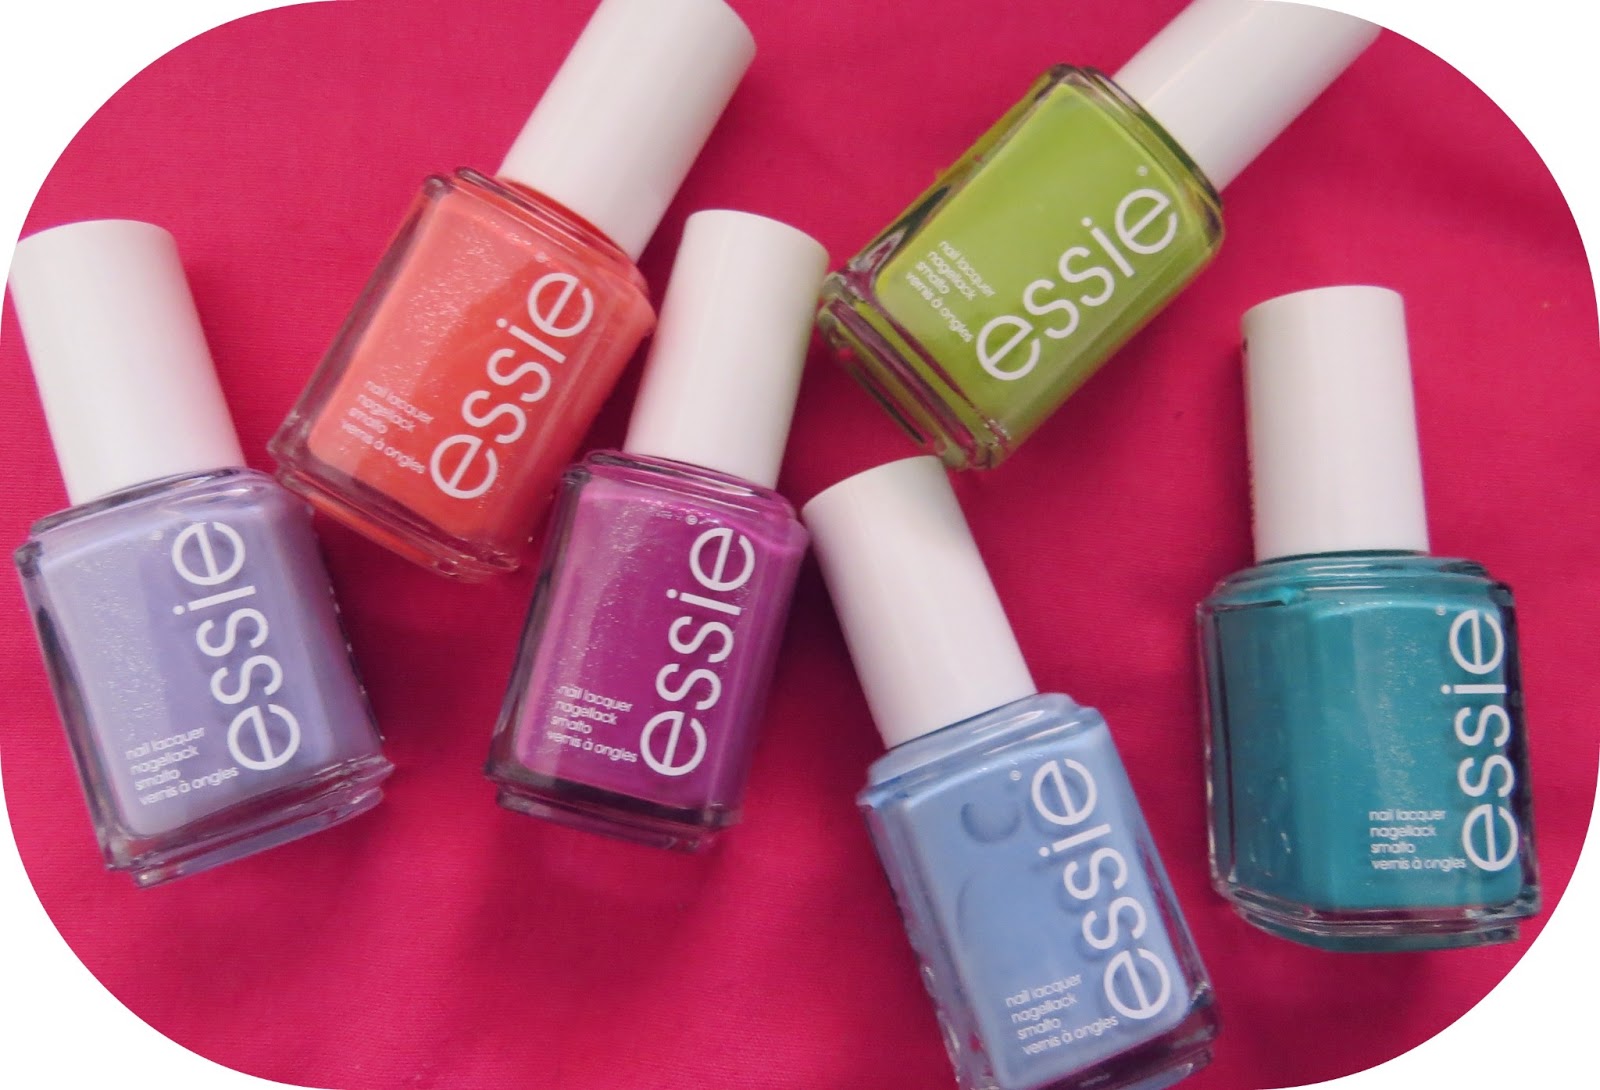 1. Essie Nail Polish in "Bare With Me" - wide 9